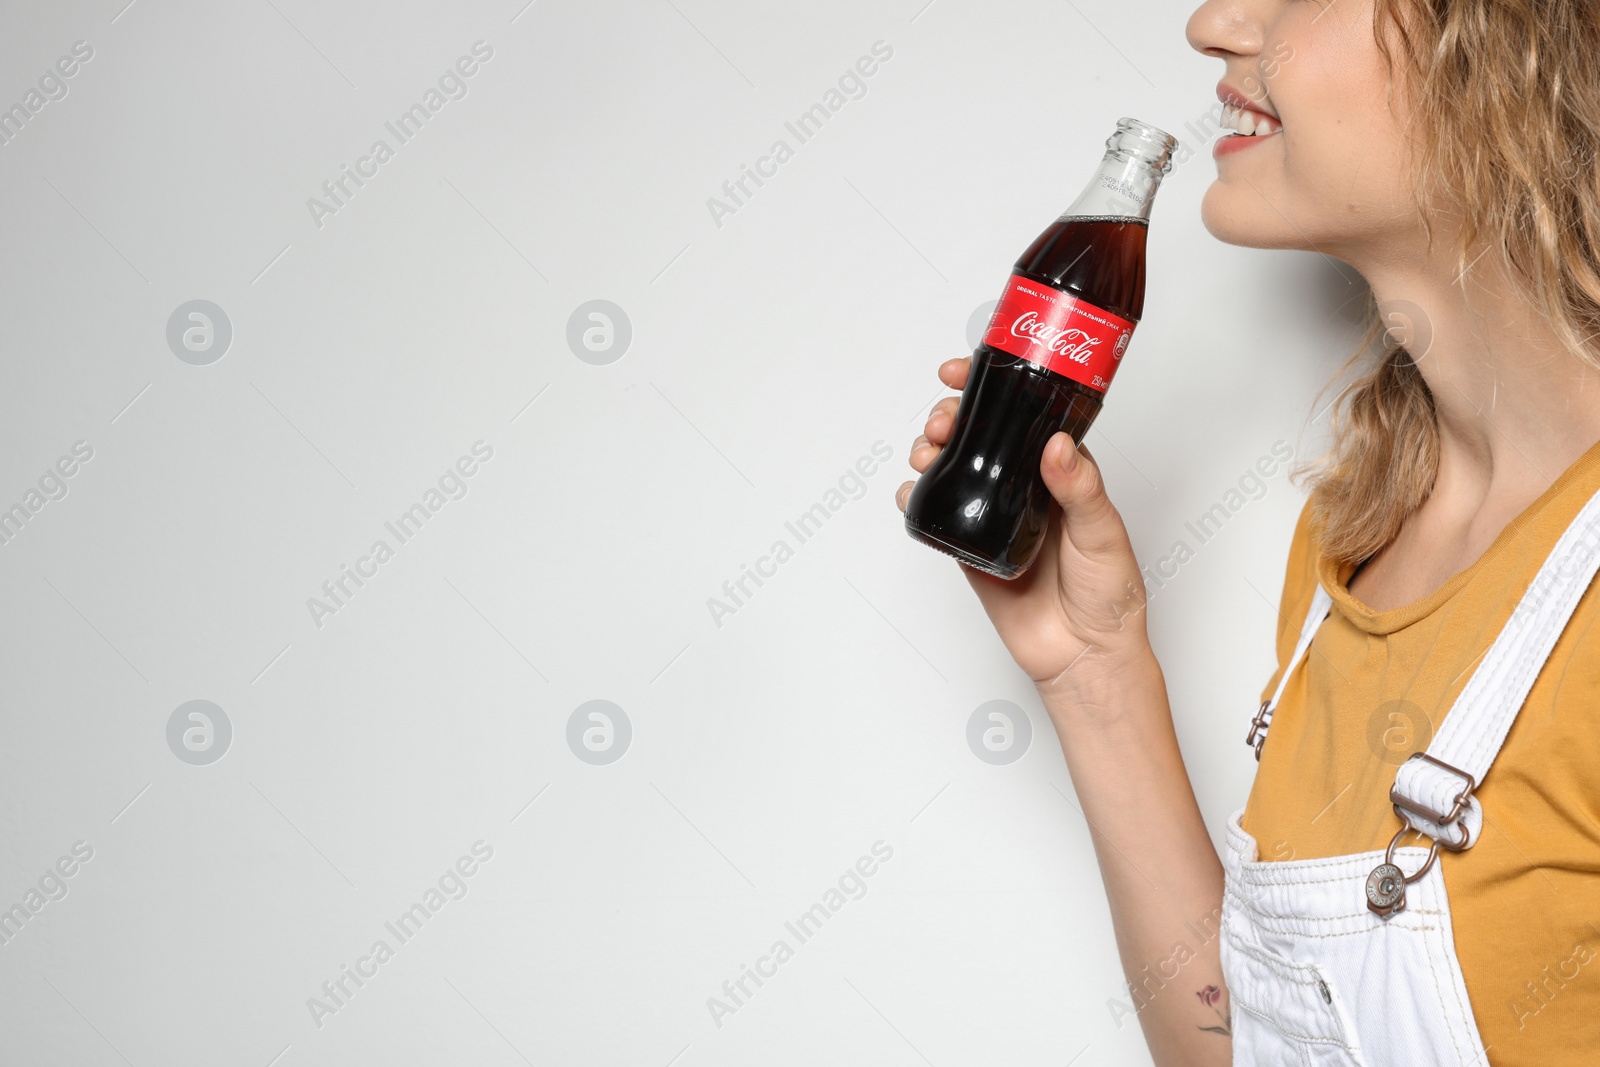 Photo of MYKOLAIV, UKRAINE - NOVEMBER 28, 2018: Young woman with bottle of Coca-Cola on white background, space for text